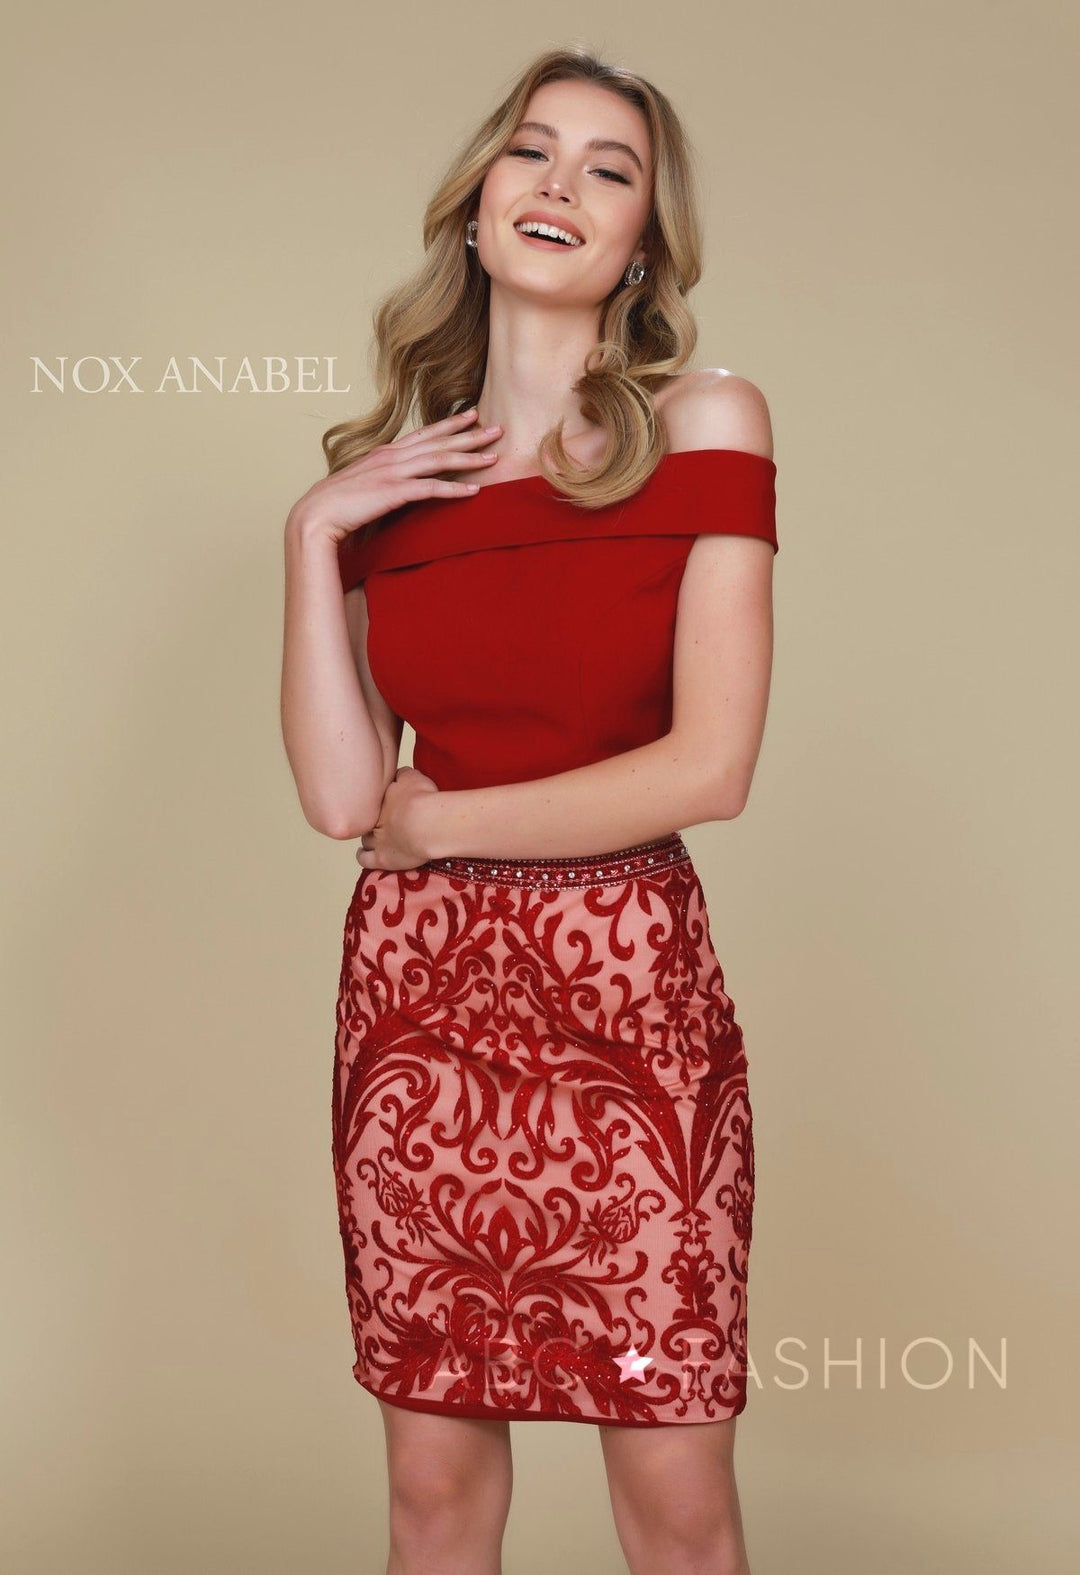 Short Two-Piece Dress with Embroidered Skirt by Nox Anabel E664-Short Cocktail Dresses-ABC Fashion